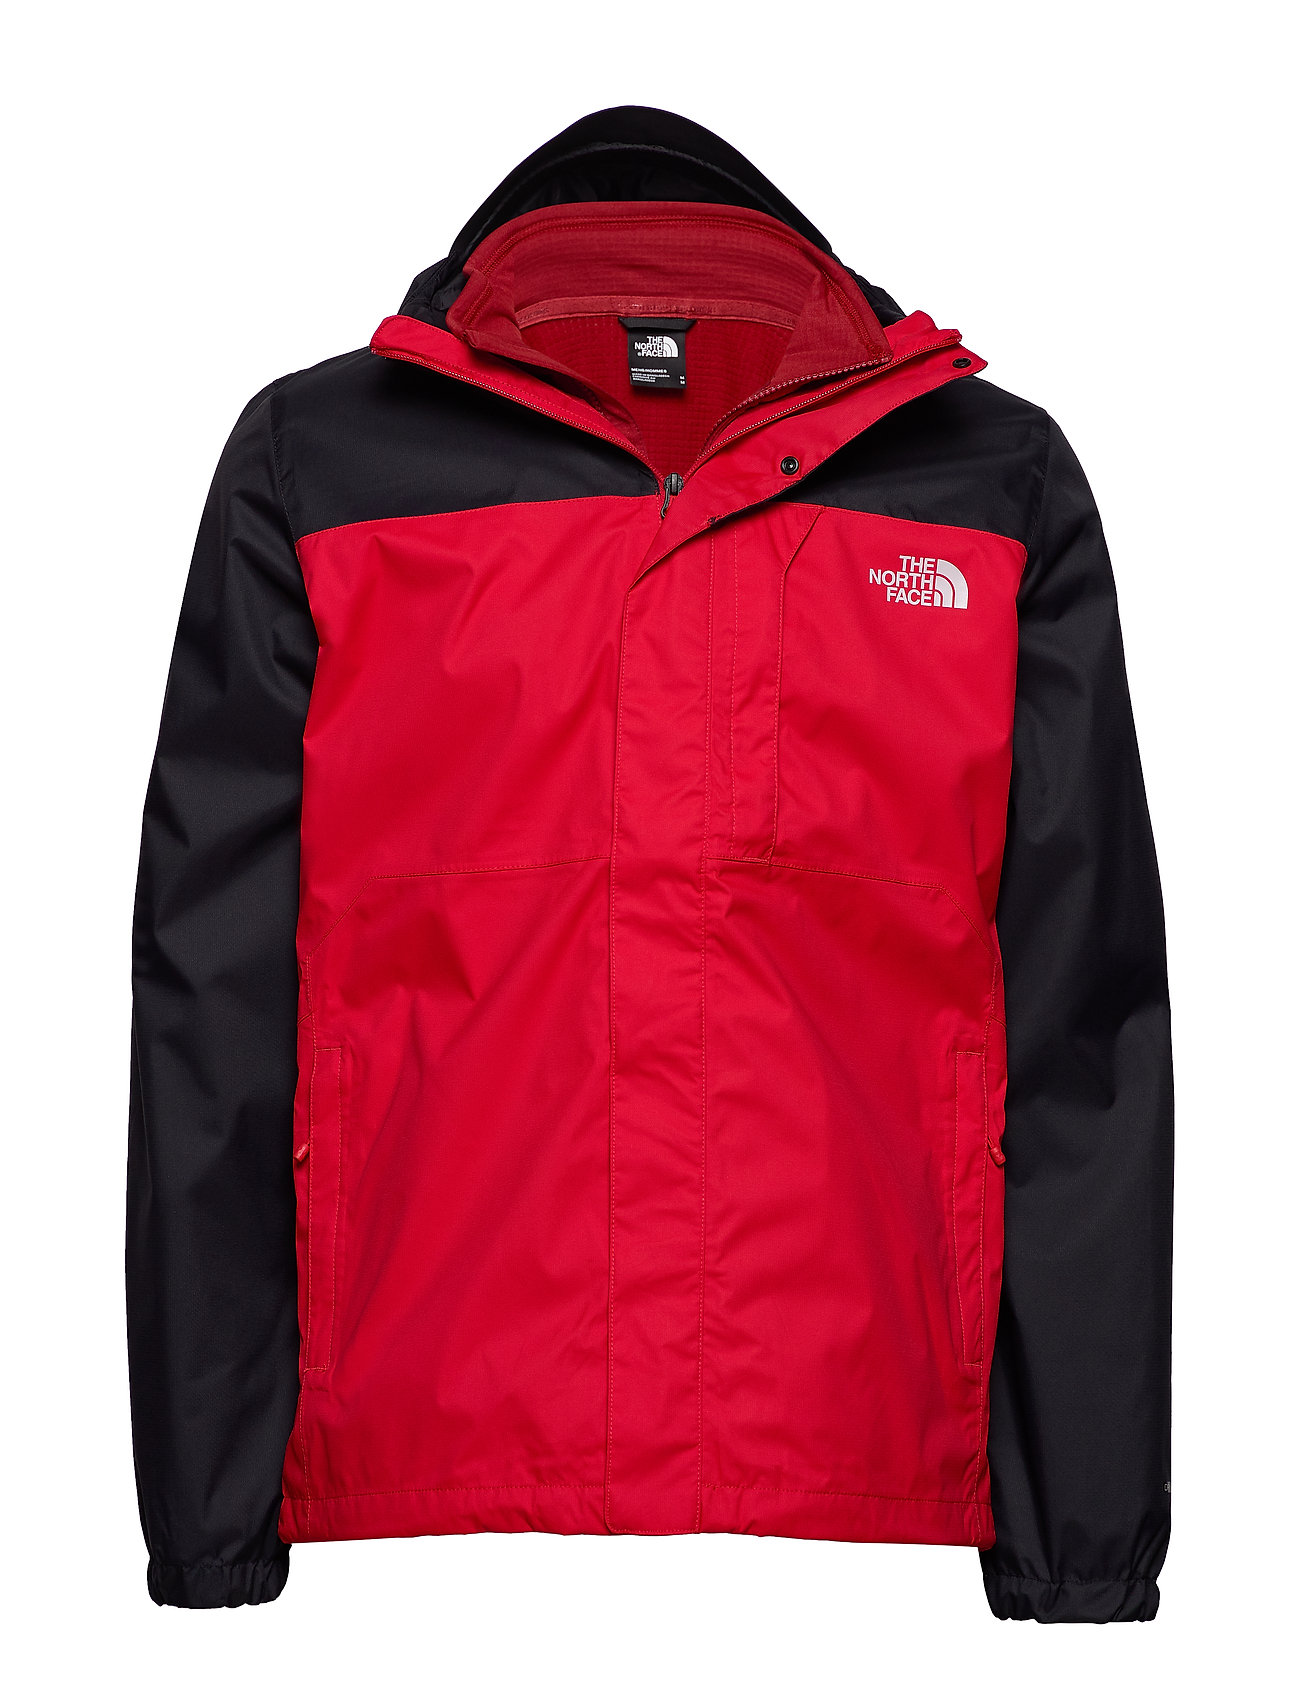 the north face quest triclimate